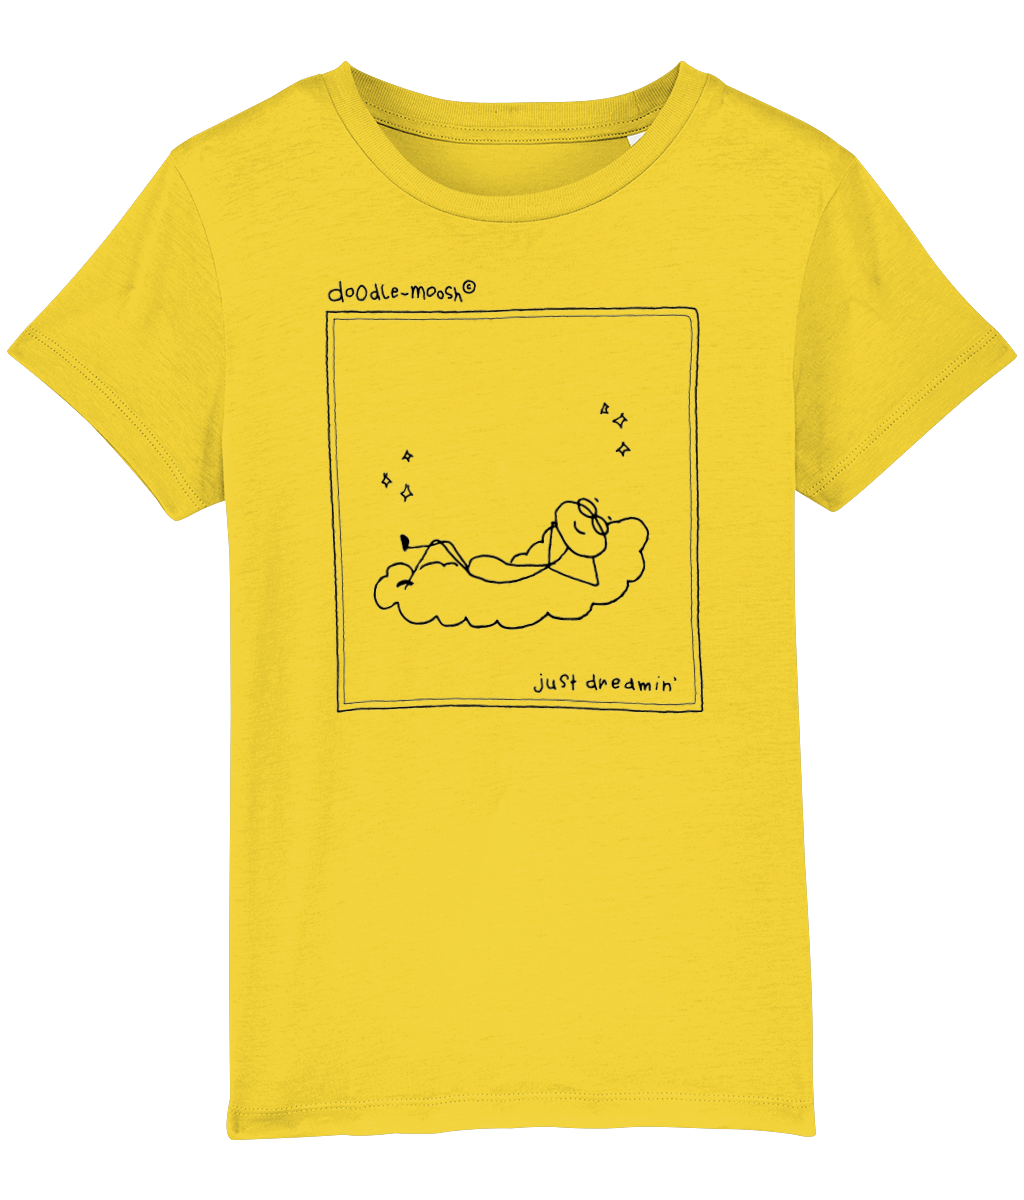 Just dreaming t-shirt, yellow with black